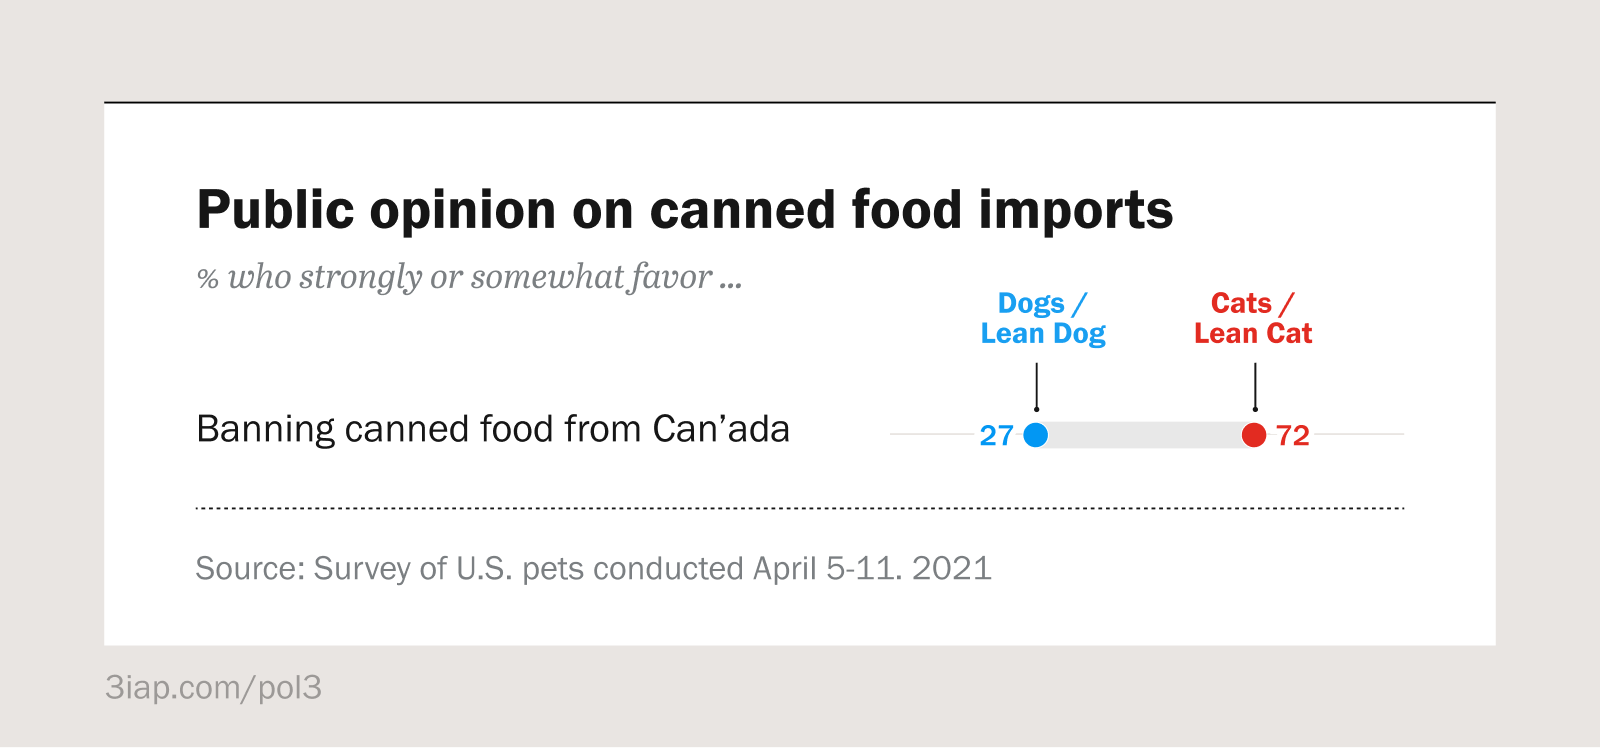 An example partisan dot plot, comparing dogs and cats support for banning canned pet food from Canada.